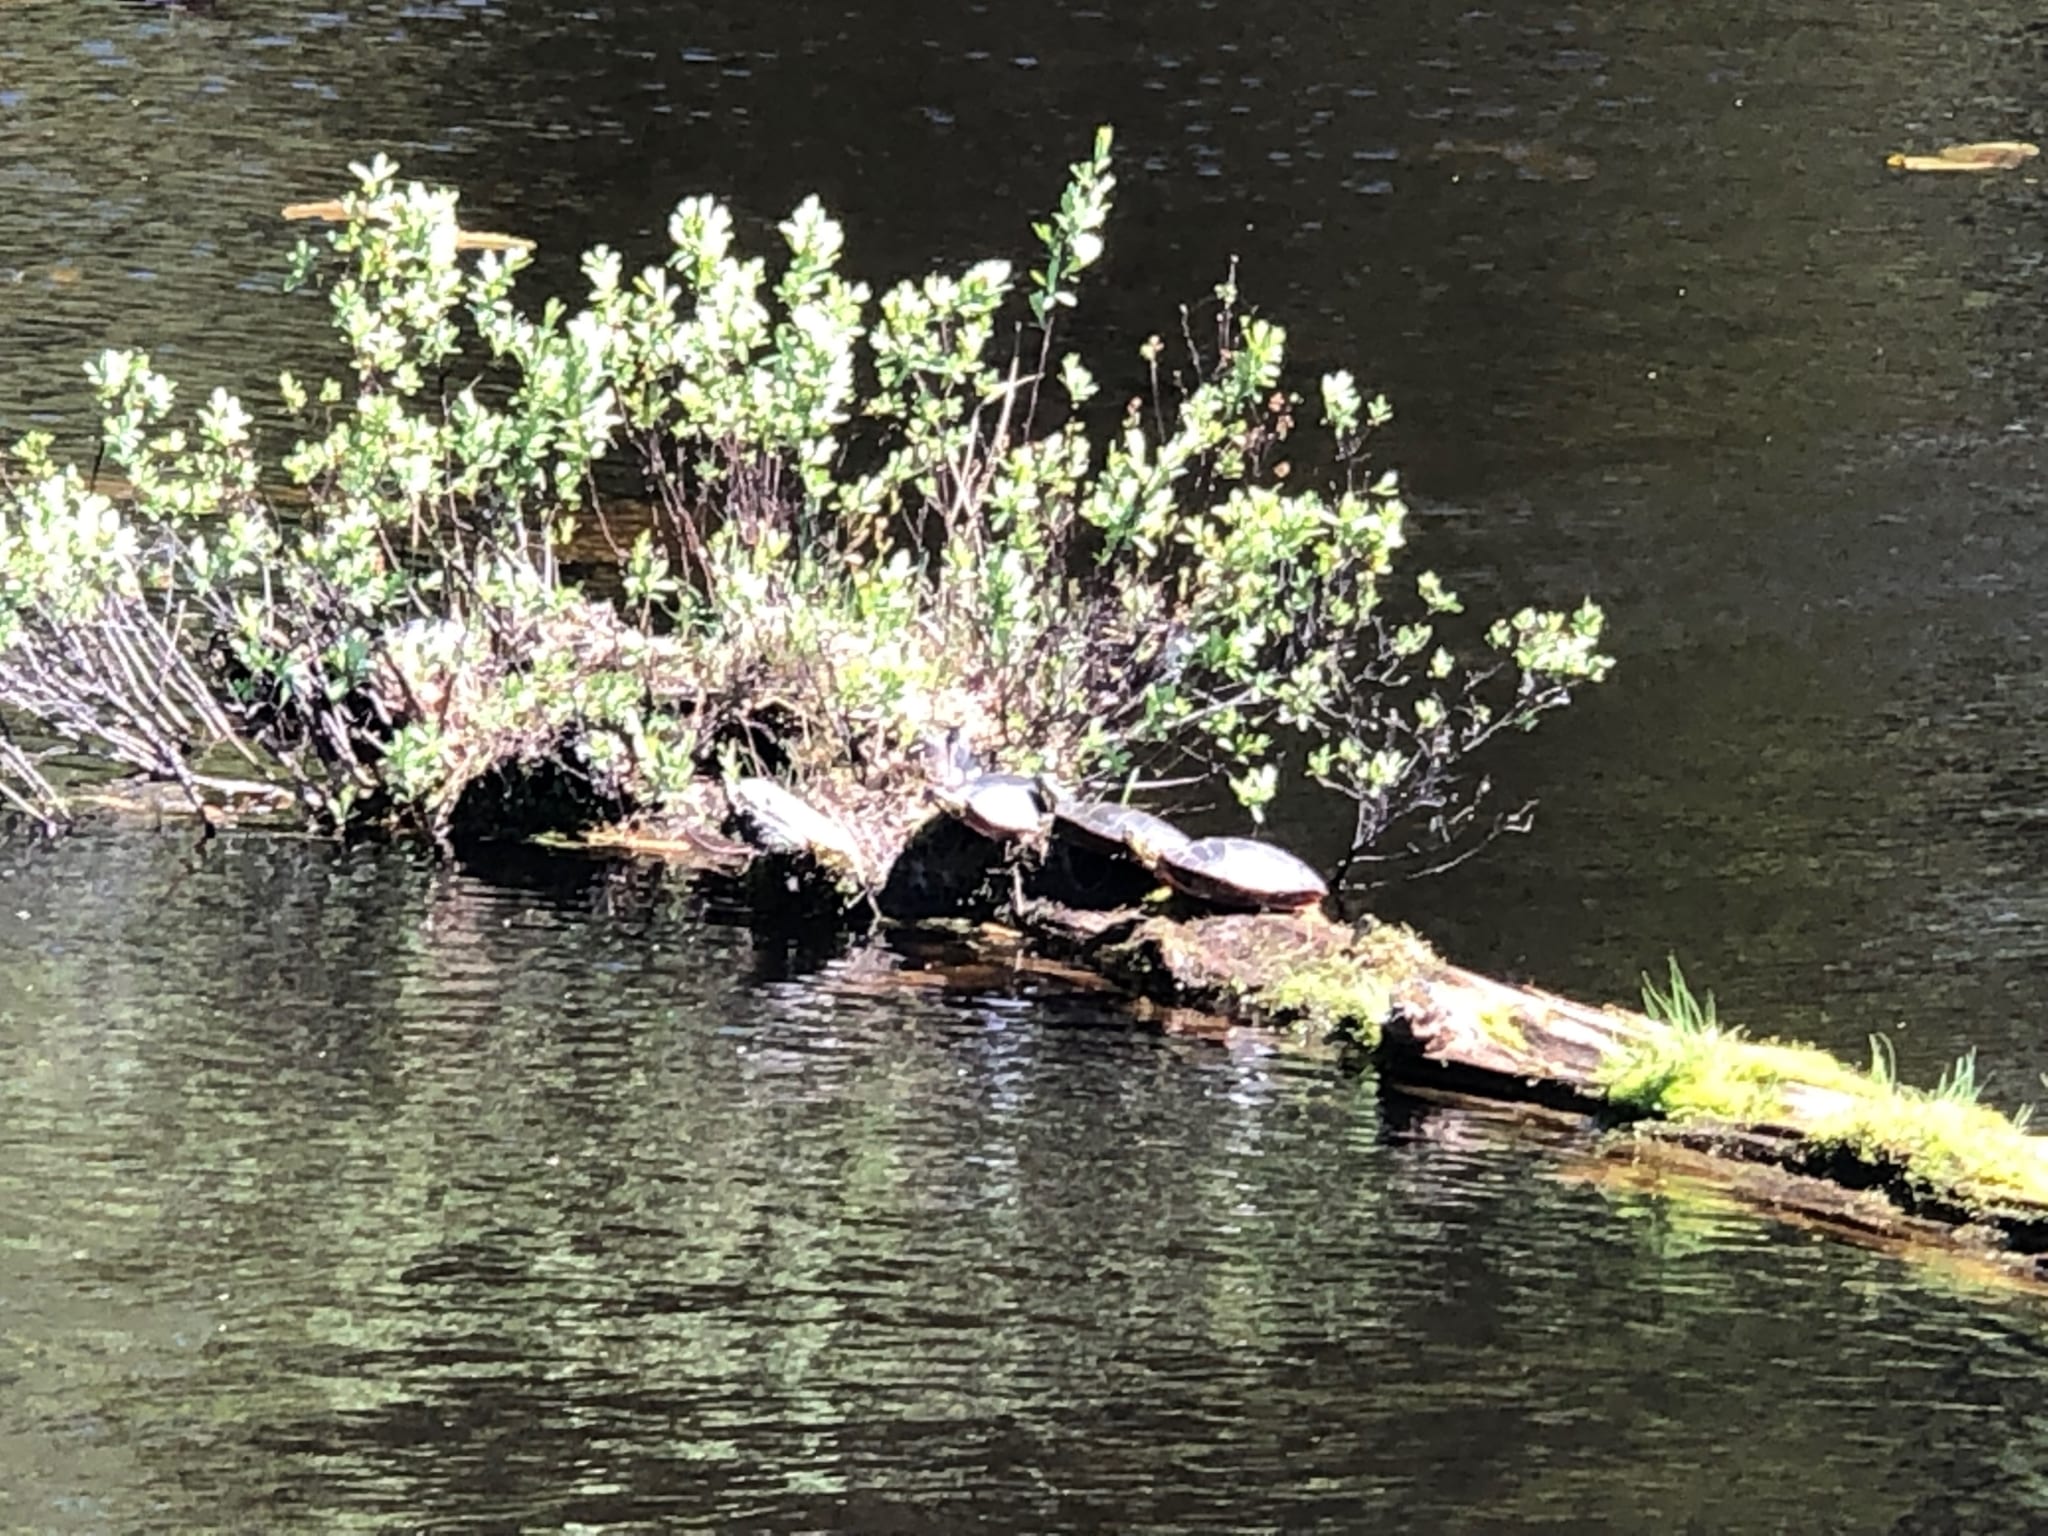 Several turtles on an islet.